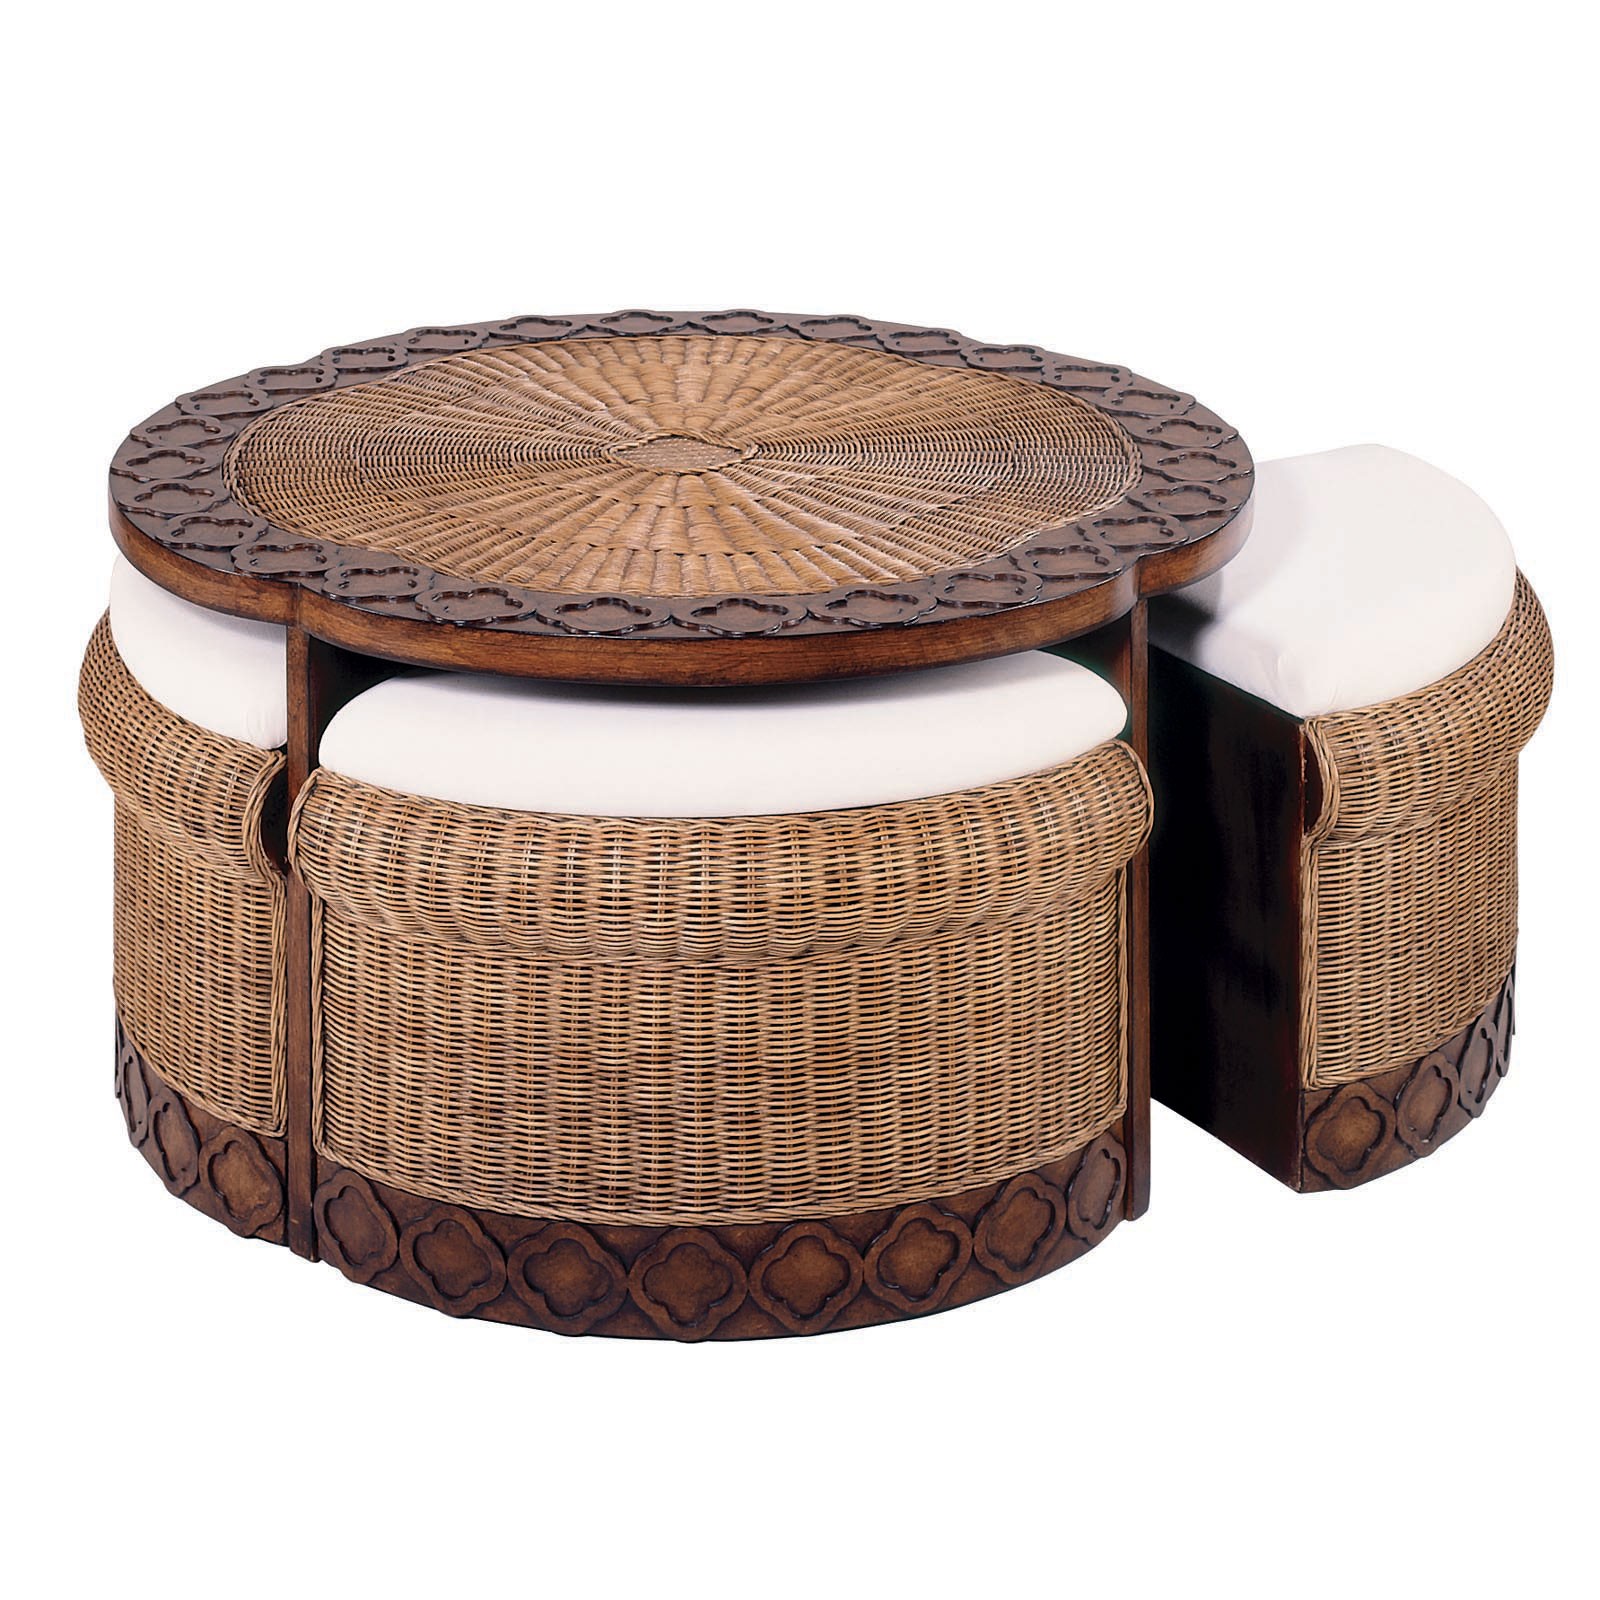 Accents rattan coffee table with stools will be getting something